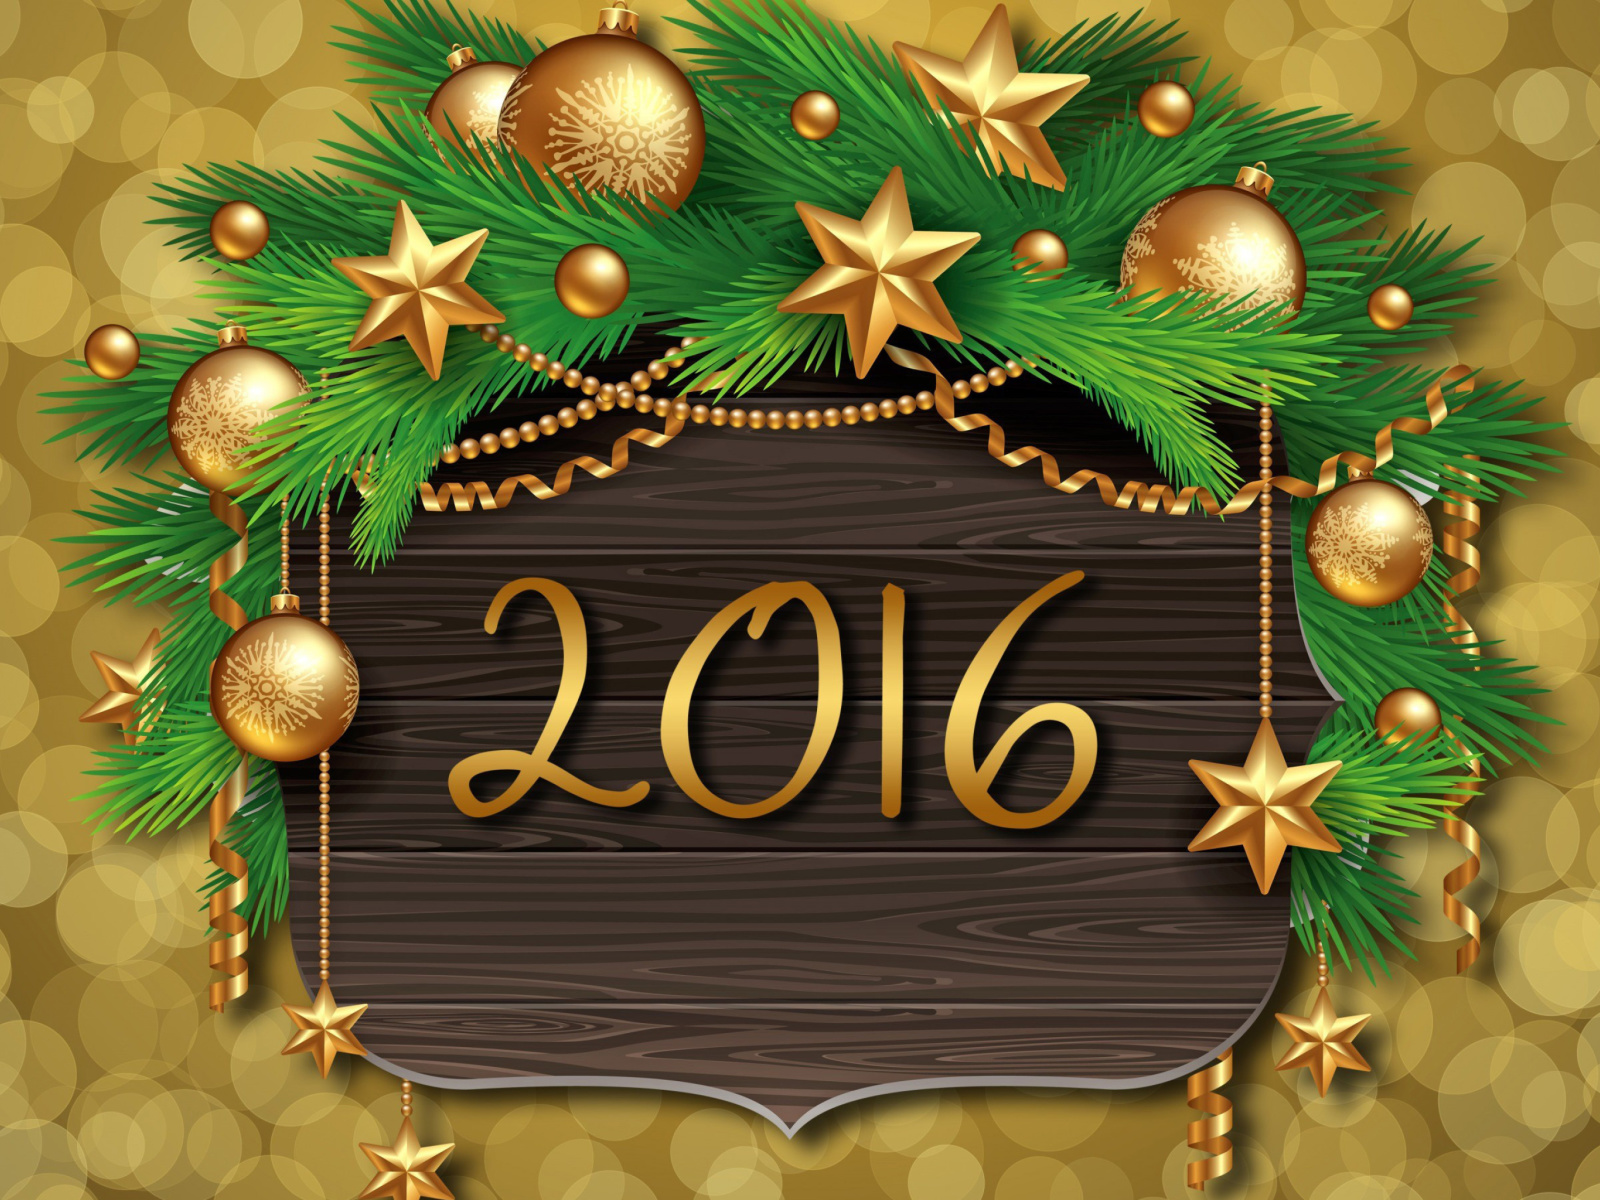 Happy New Year 2016 Golden Style wallpaper 1600x1200